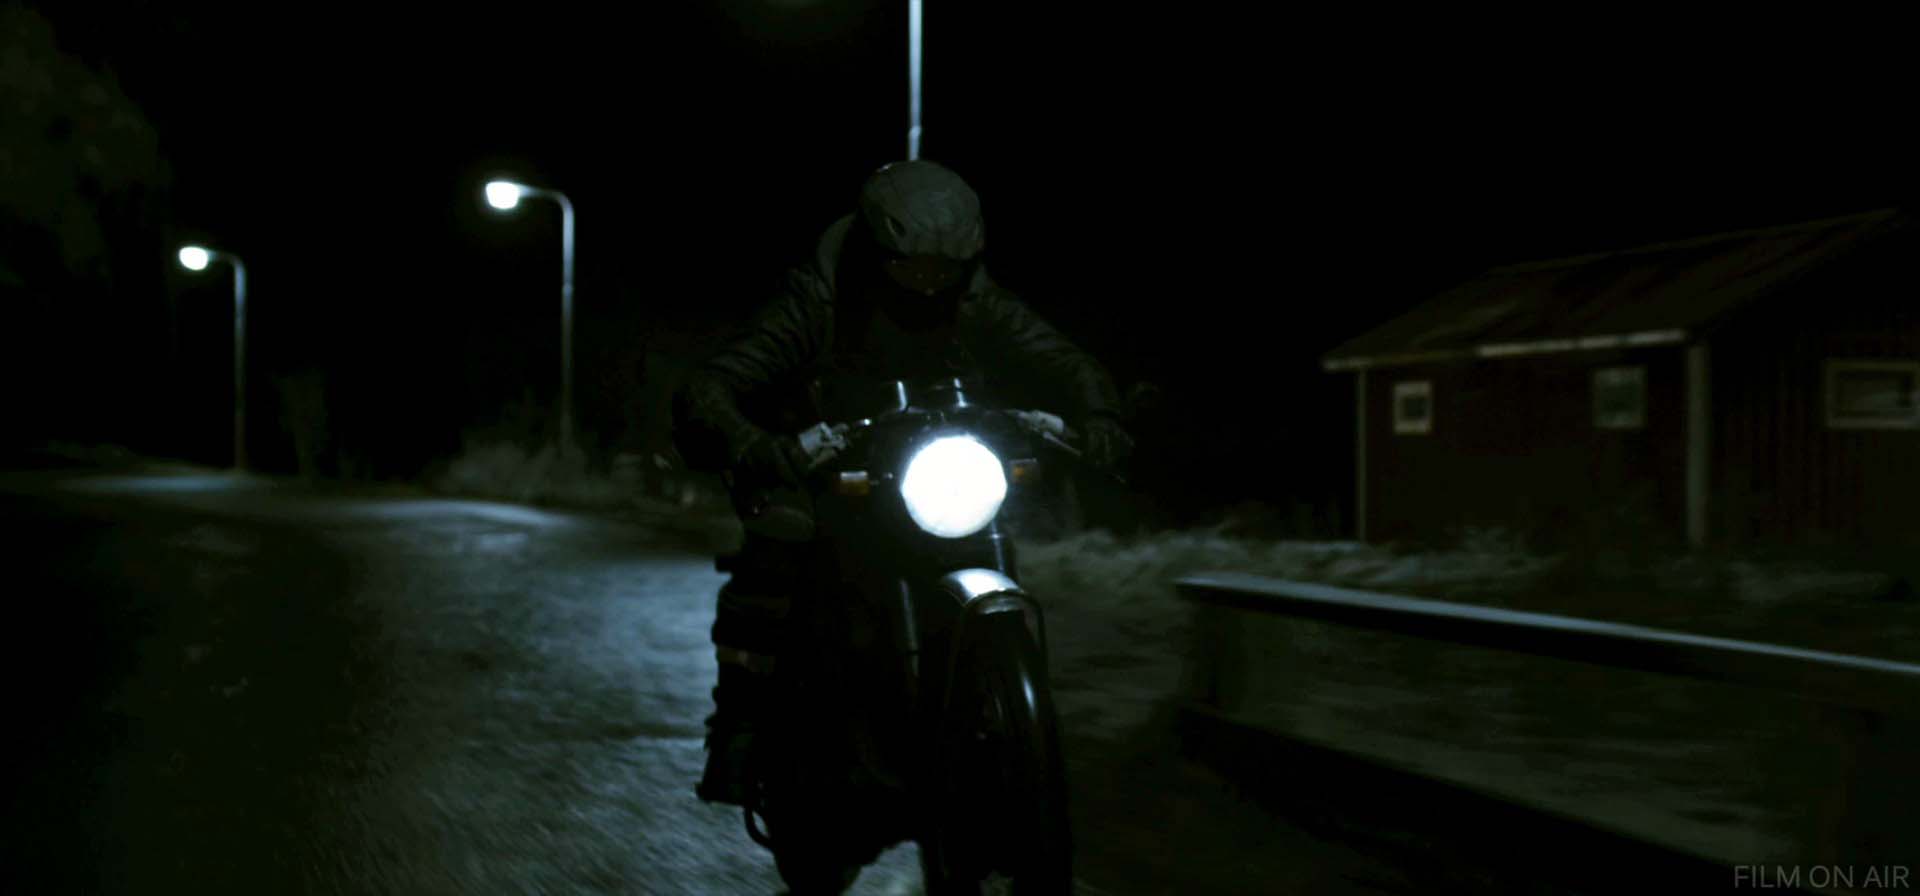 Riding Bike At Night
 in The Girl with the Dragon Tattoo in The Girl with the Dragon Tattoo